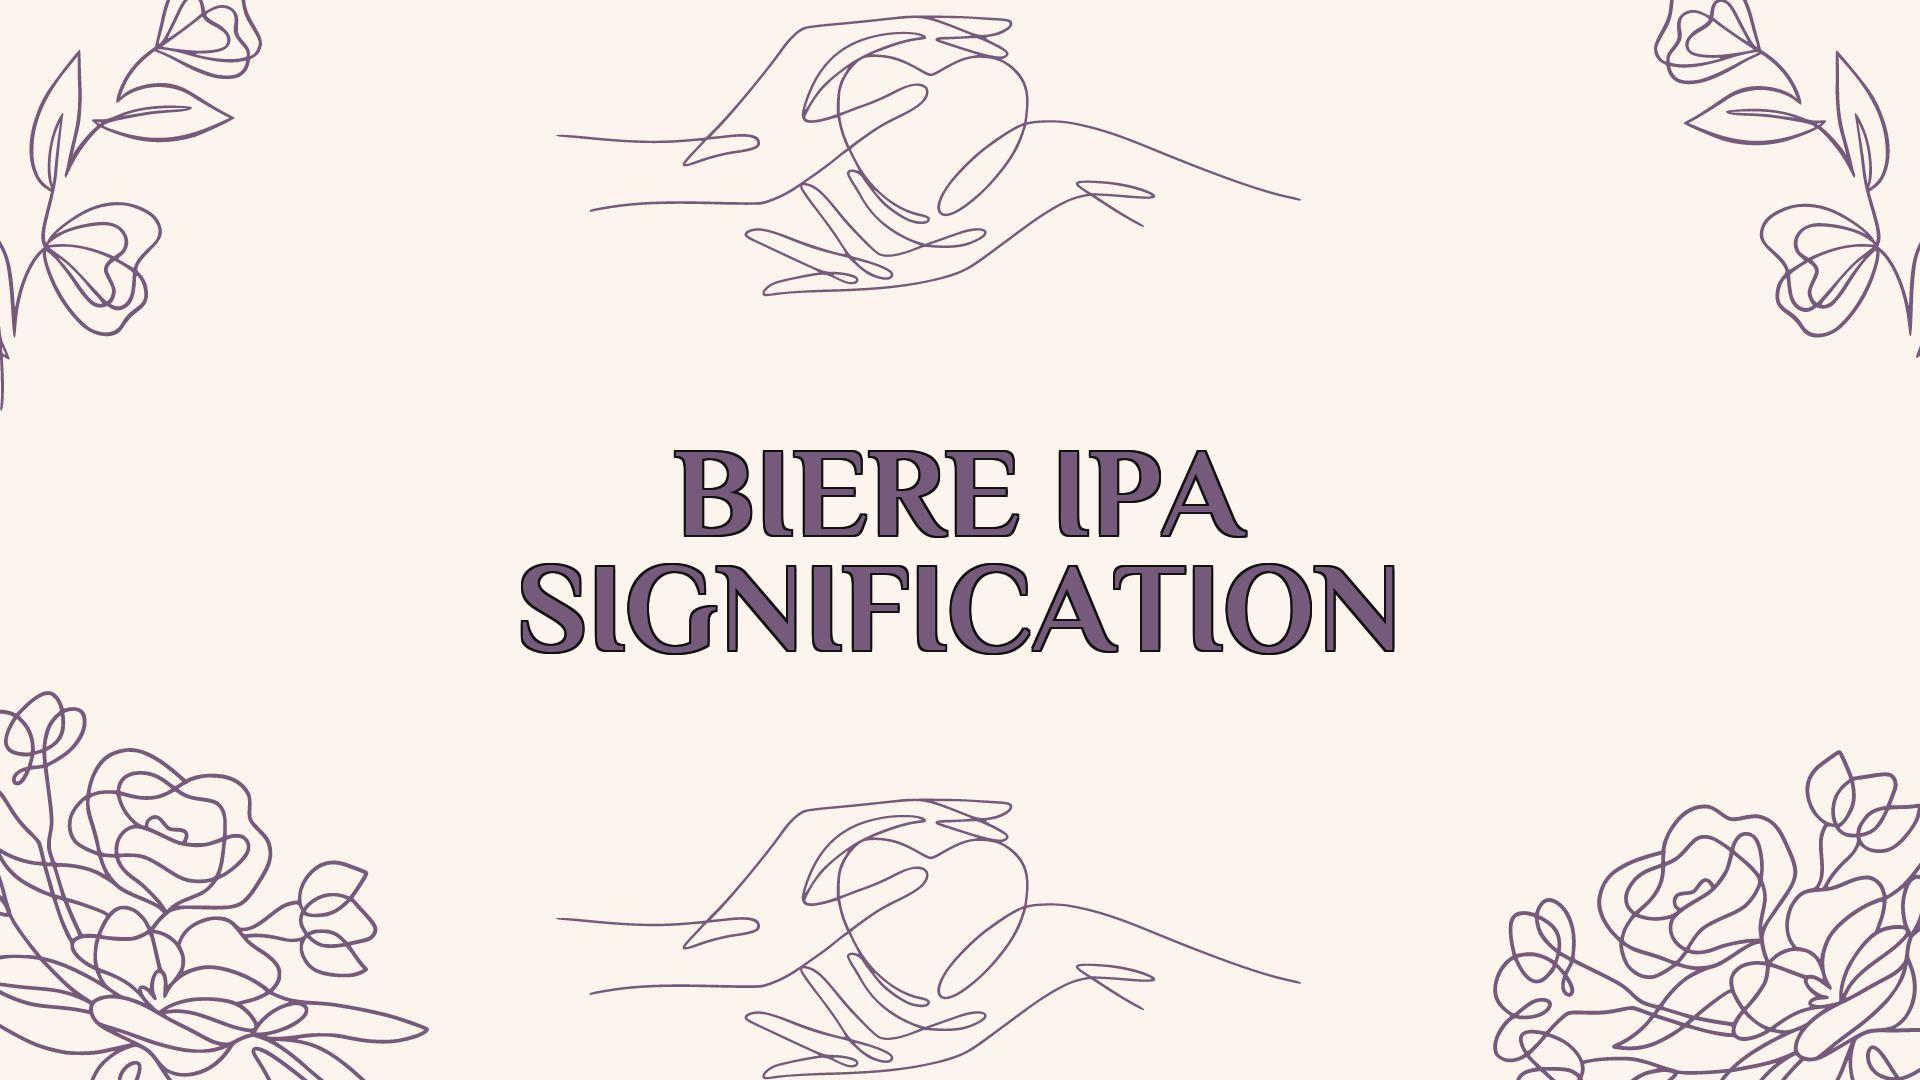 biere ipa signification 1